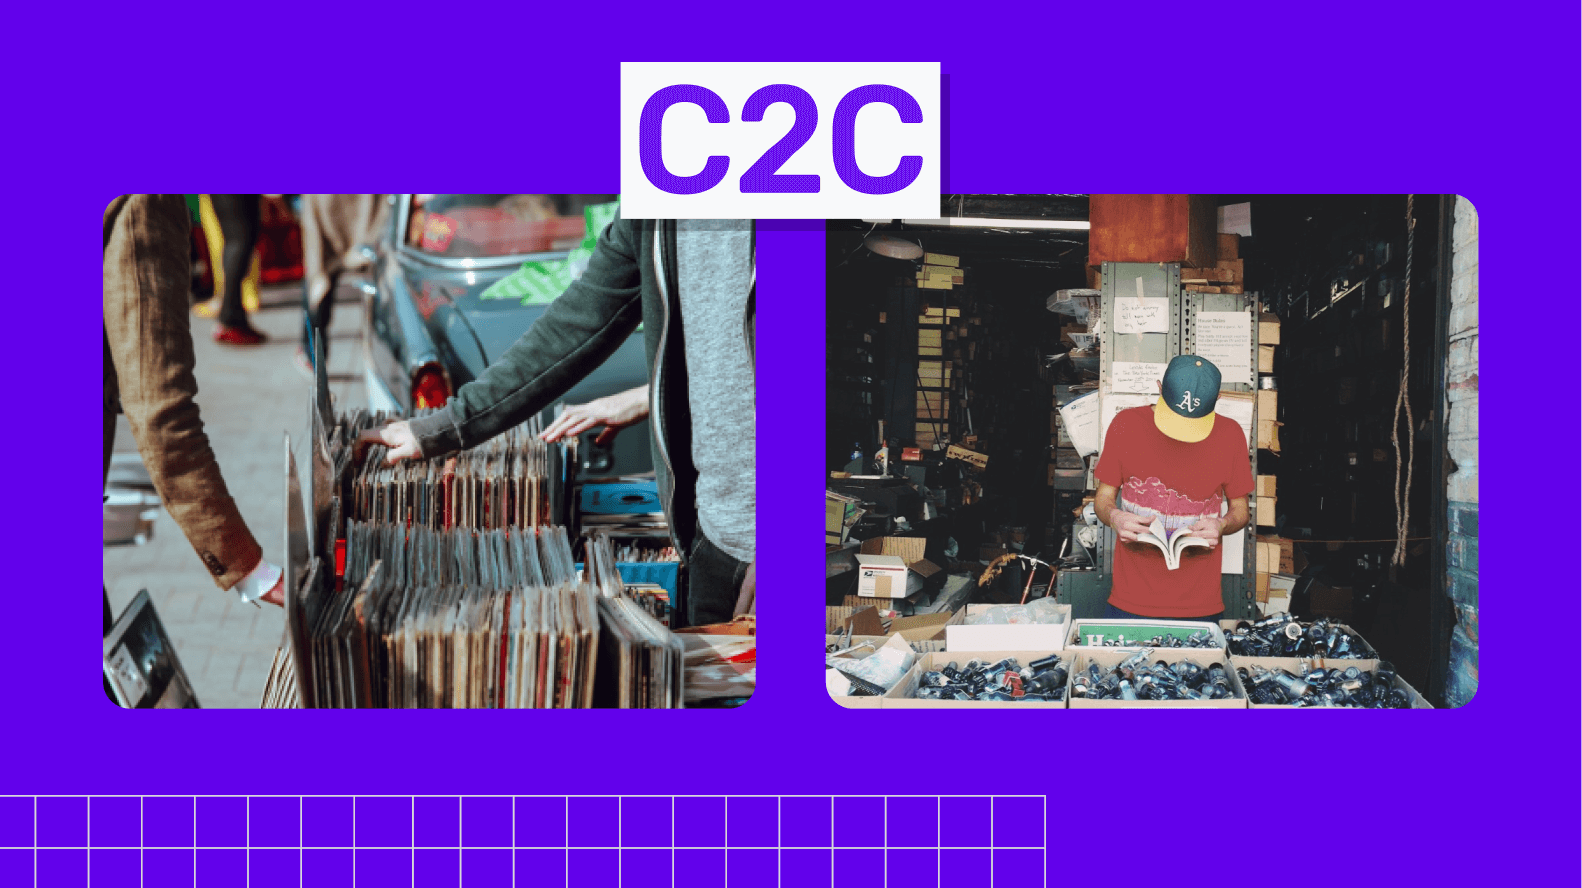 A concept of C2C ecommerce business model depicting a street shopper and a street seller in the same pic